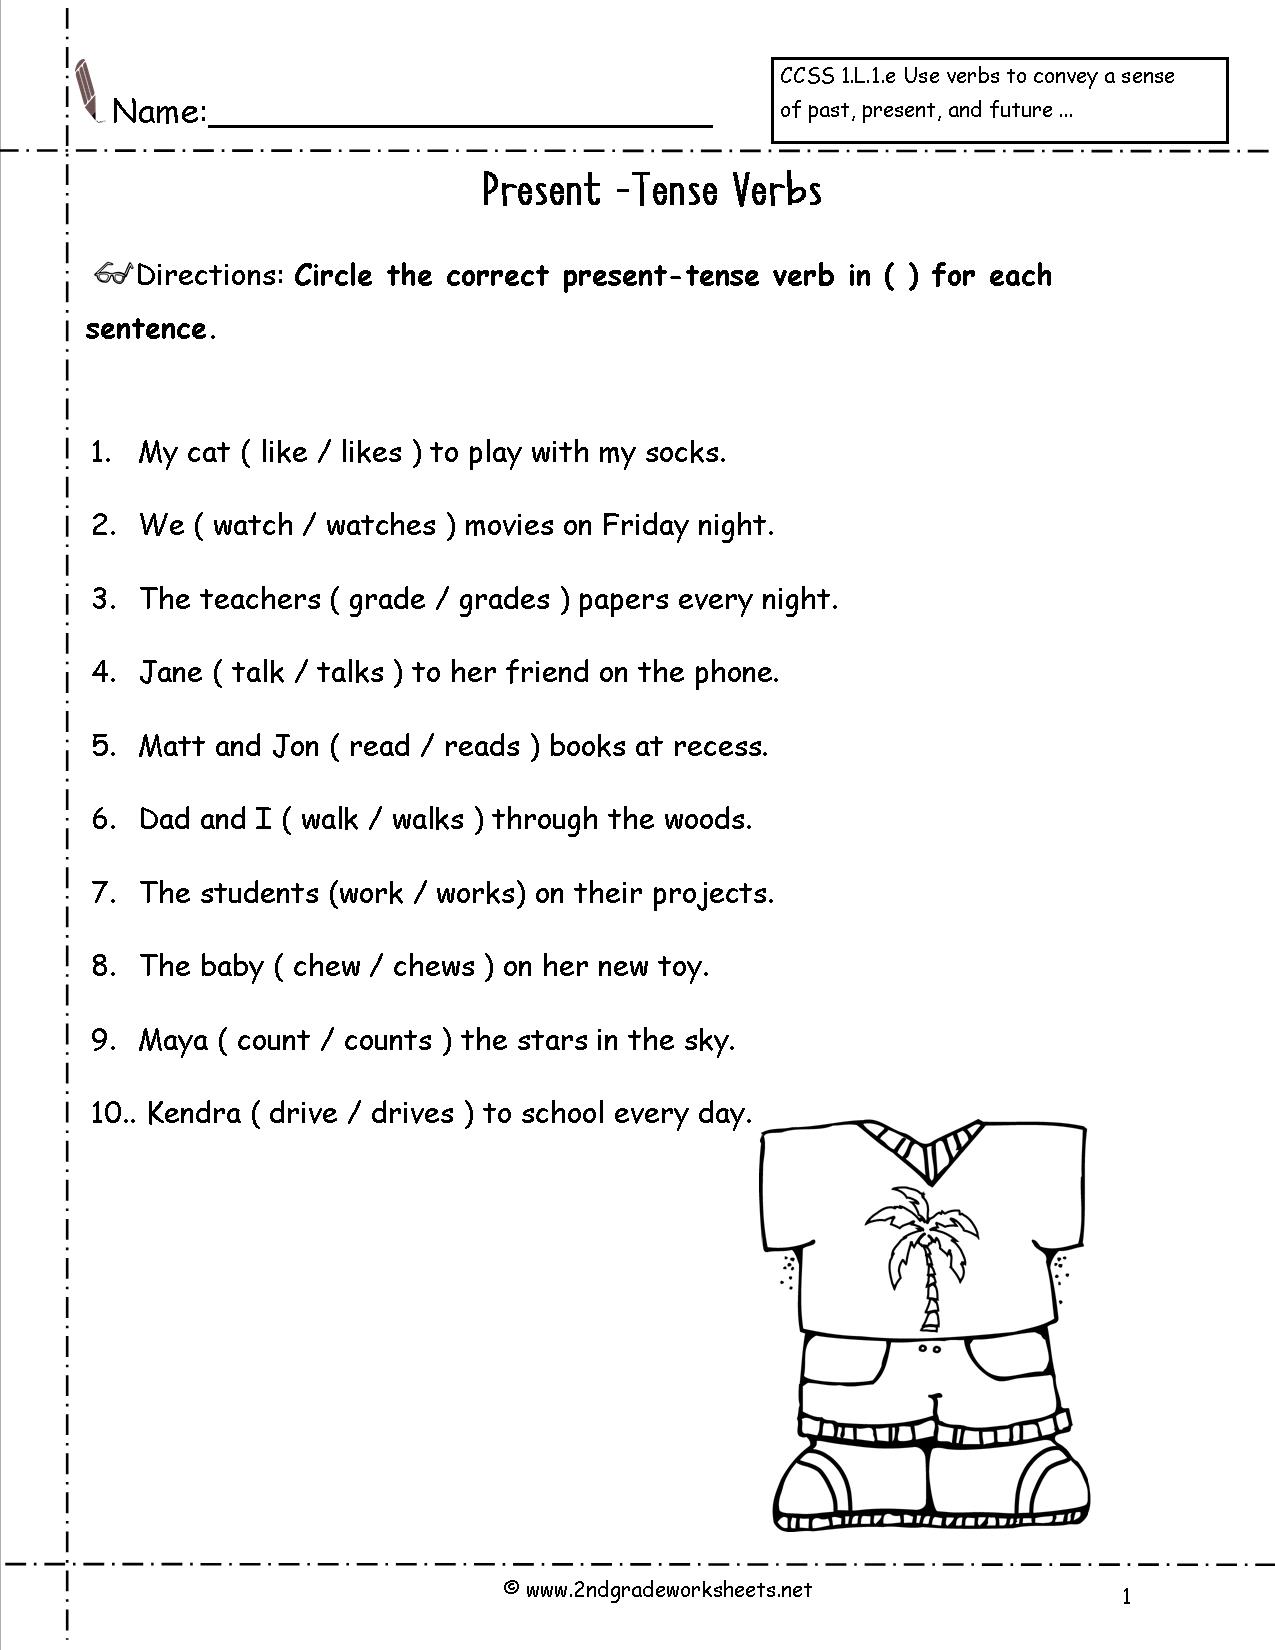 11 Best Images of Choose The Correct Verb Worksheet Present Tense